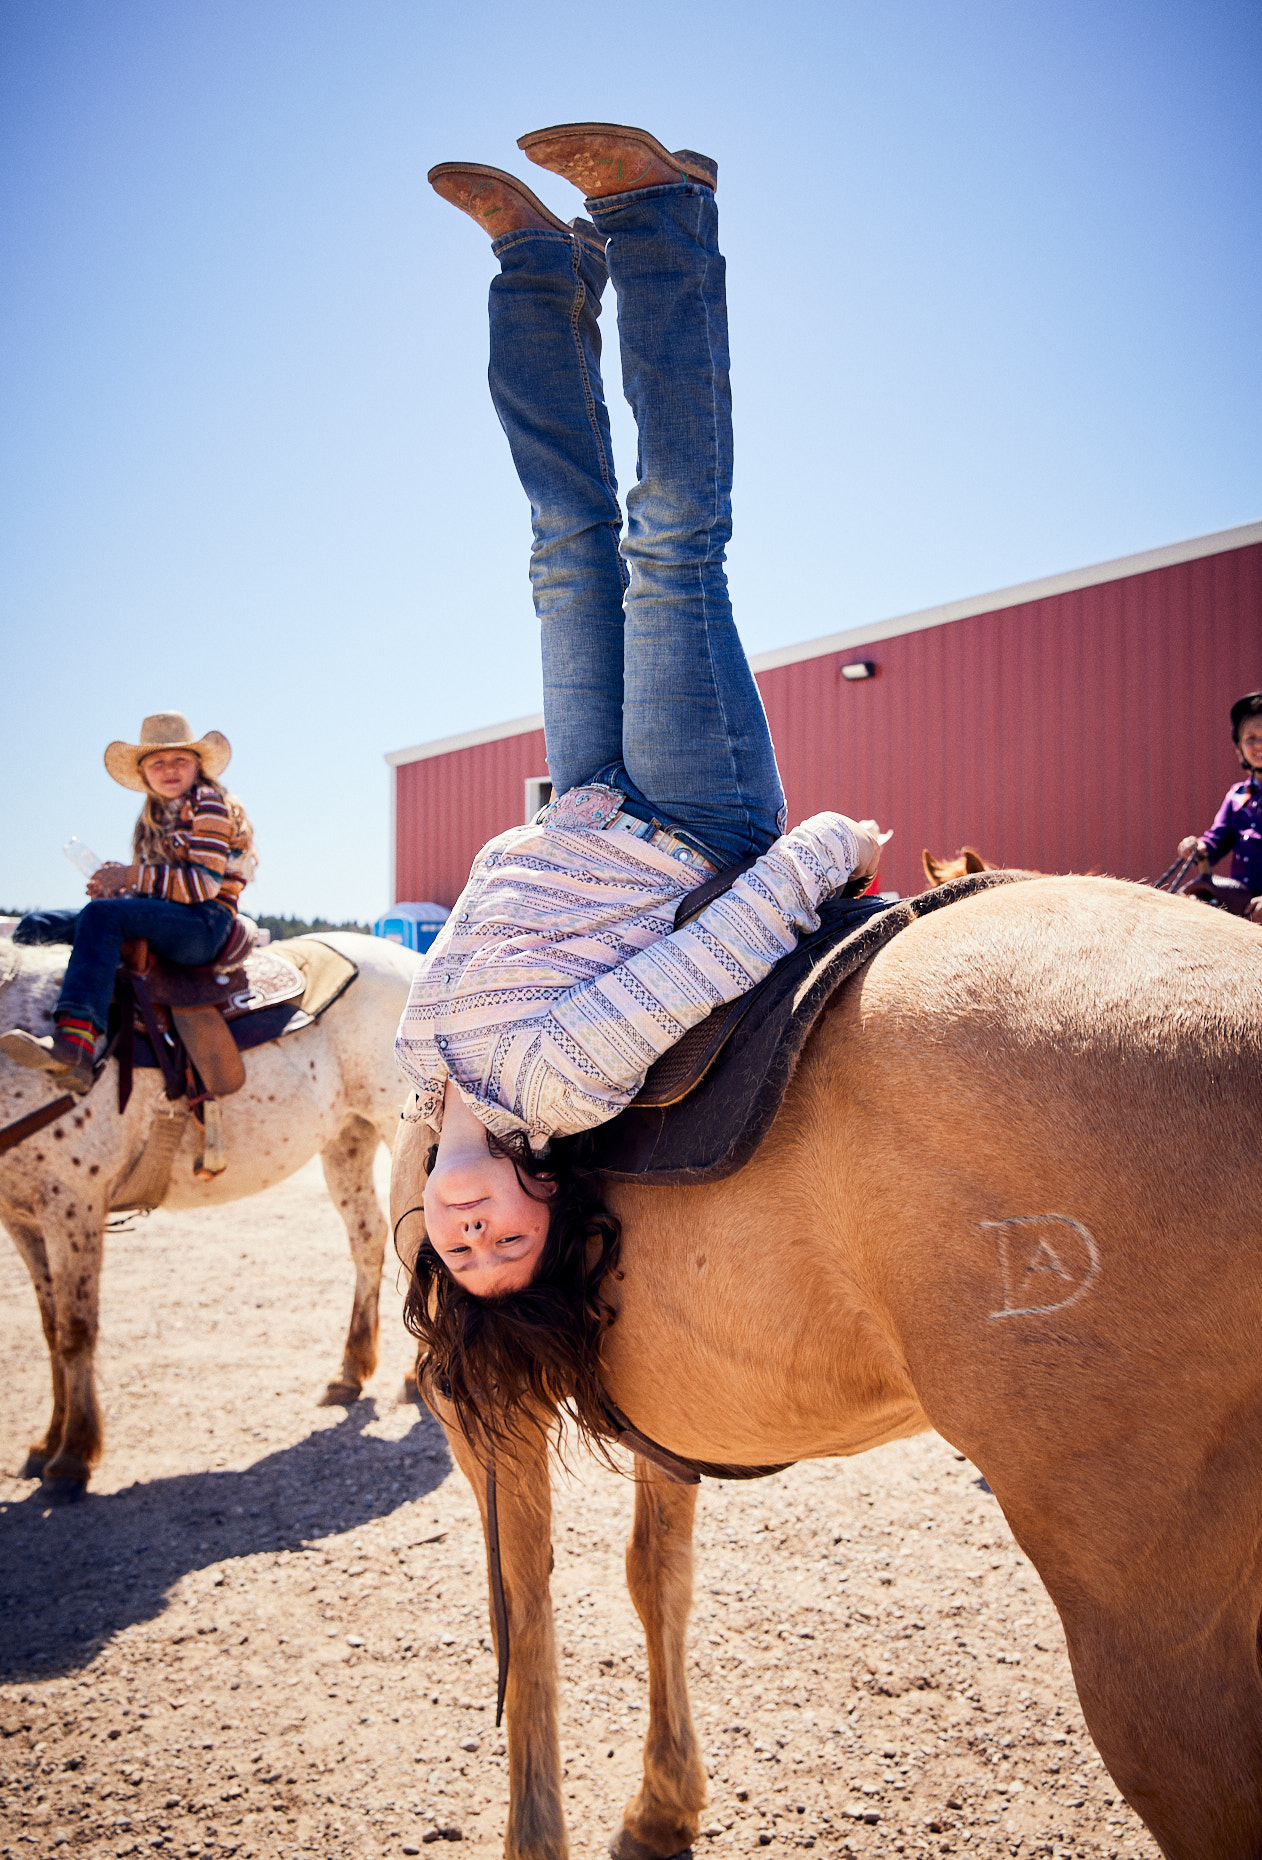 Girl swinging upside down on her horse | Childrens photography by Saverio Truglia